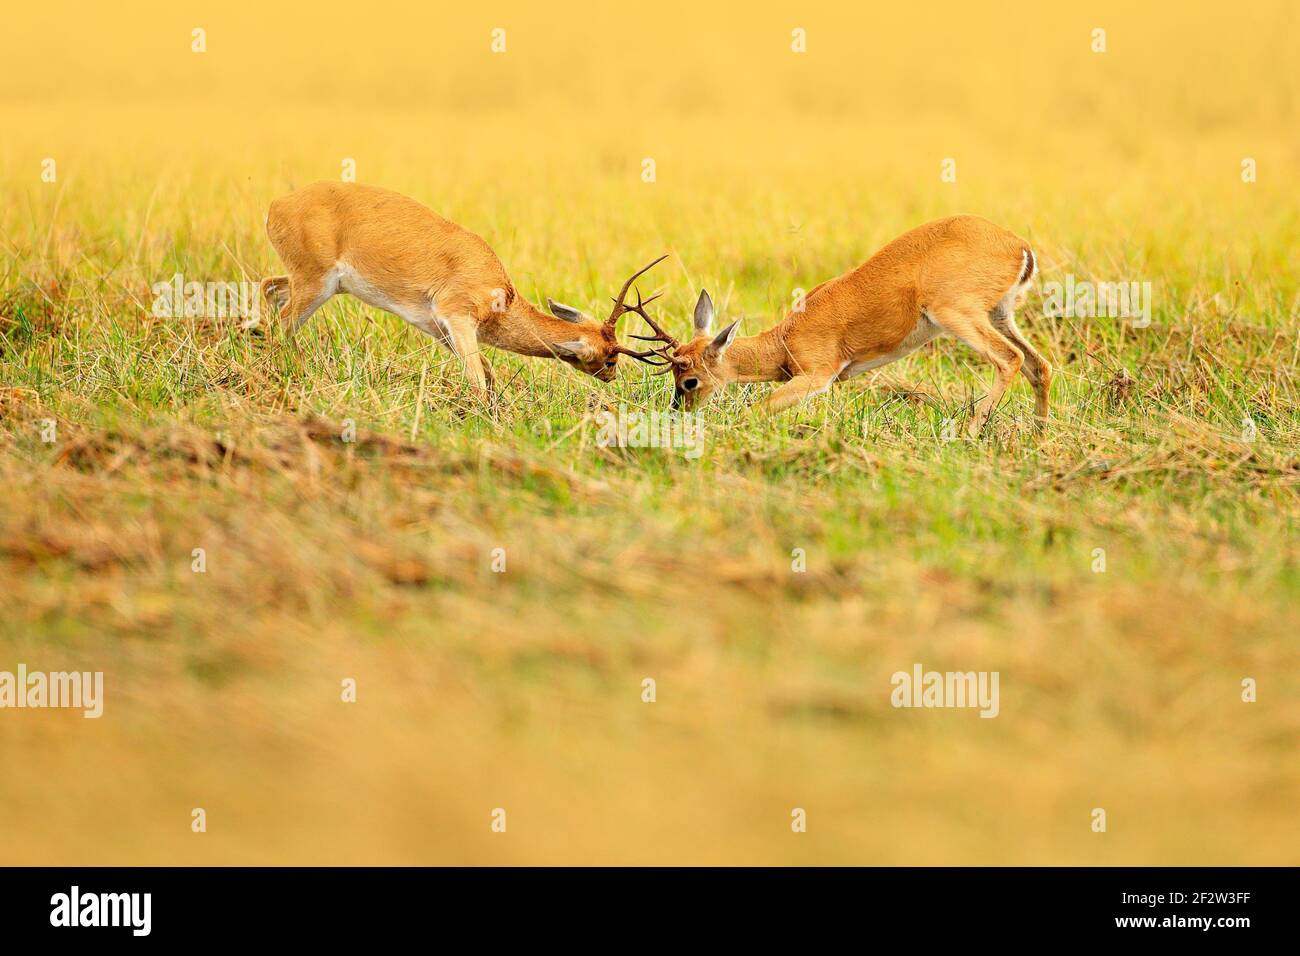 Brazil deer fight. Two animal in grass. Pampas Deer, Ozotoceros bezoarticus, sitting in the green grass, Pantanal, Brazil. Wildlife scene from nature. Stock Photo